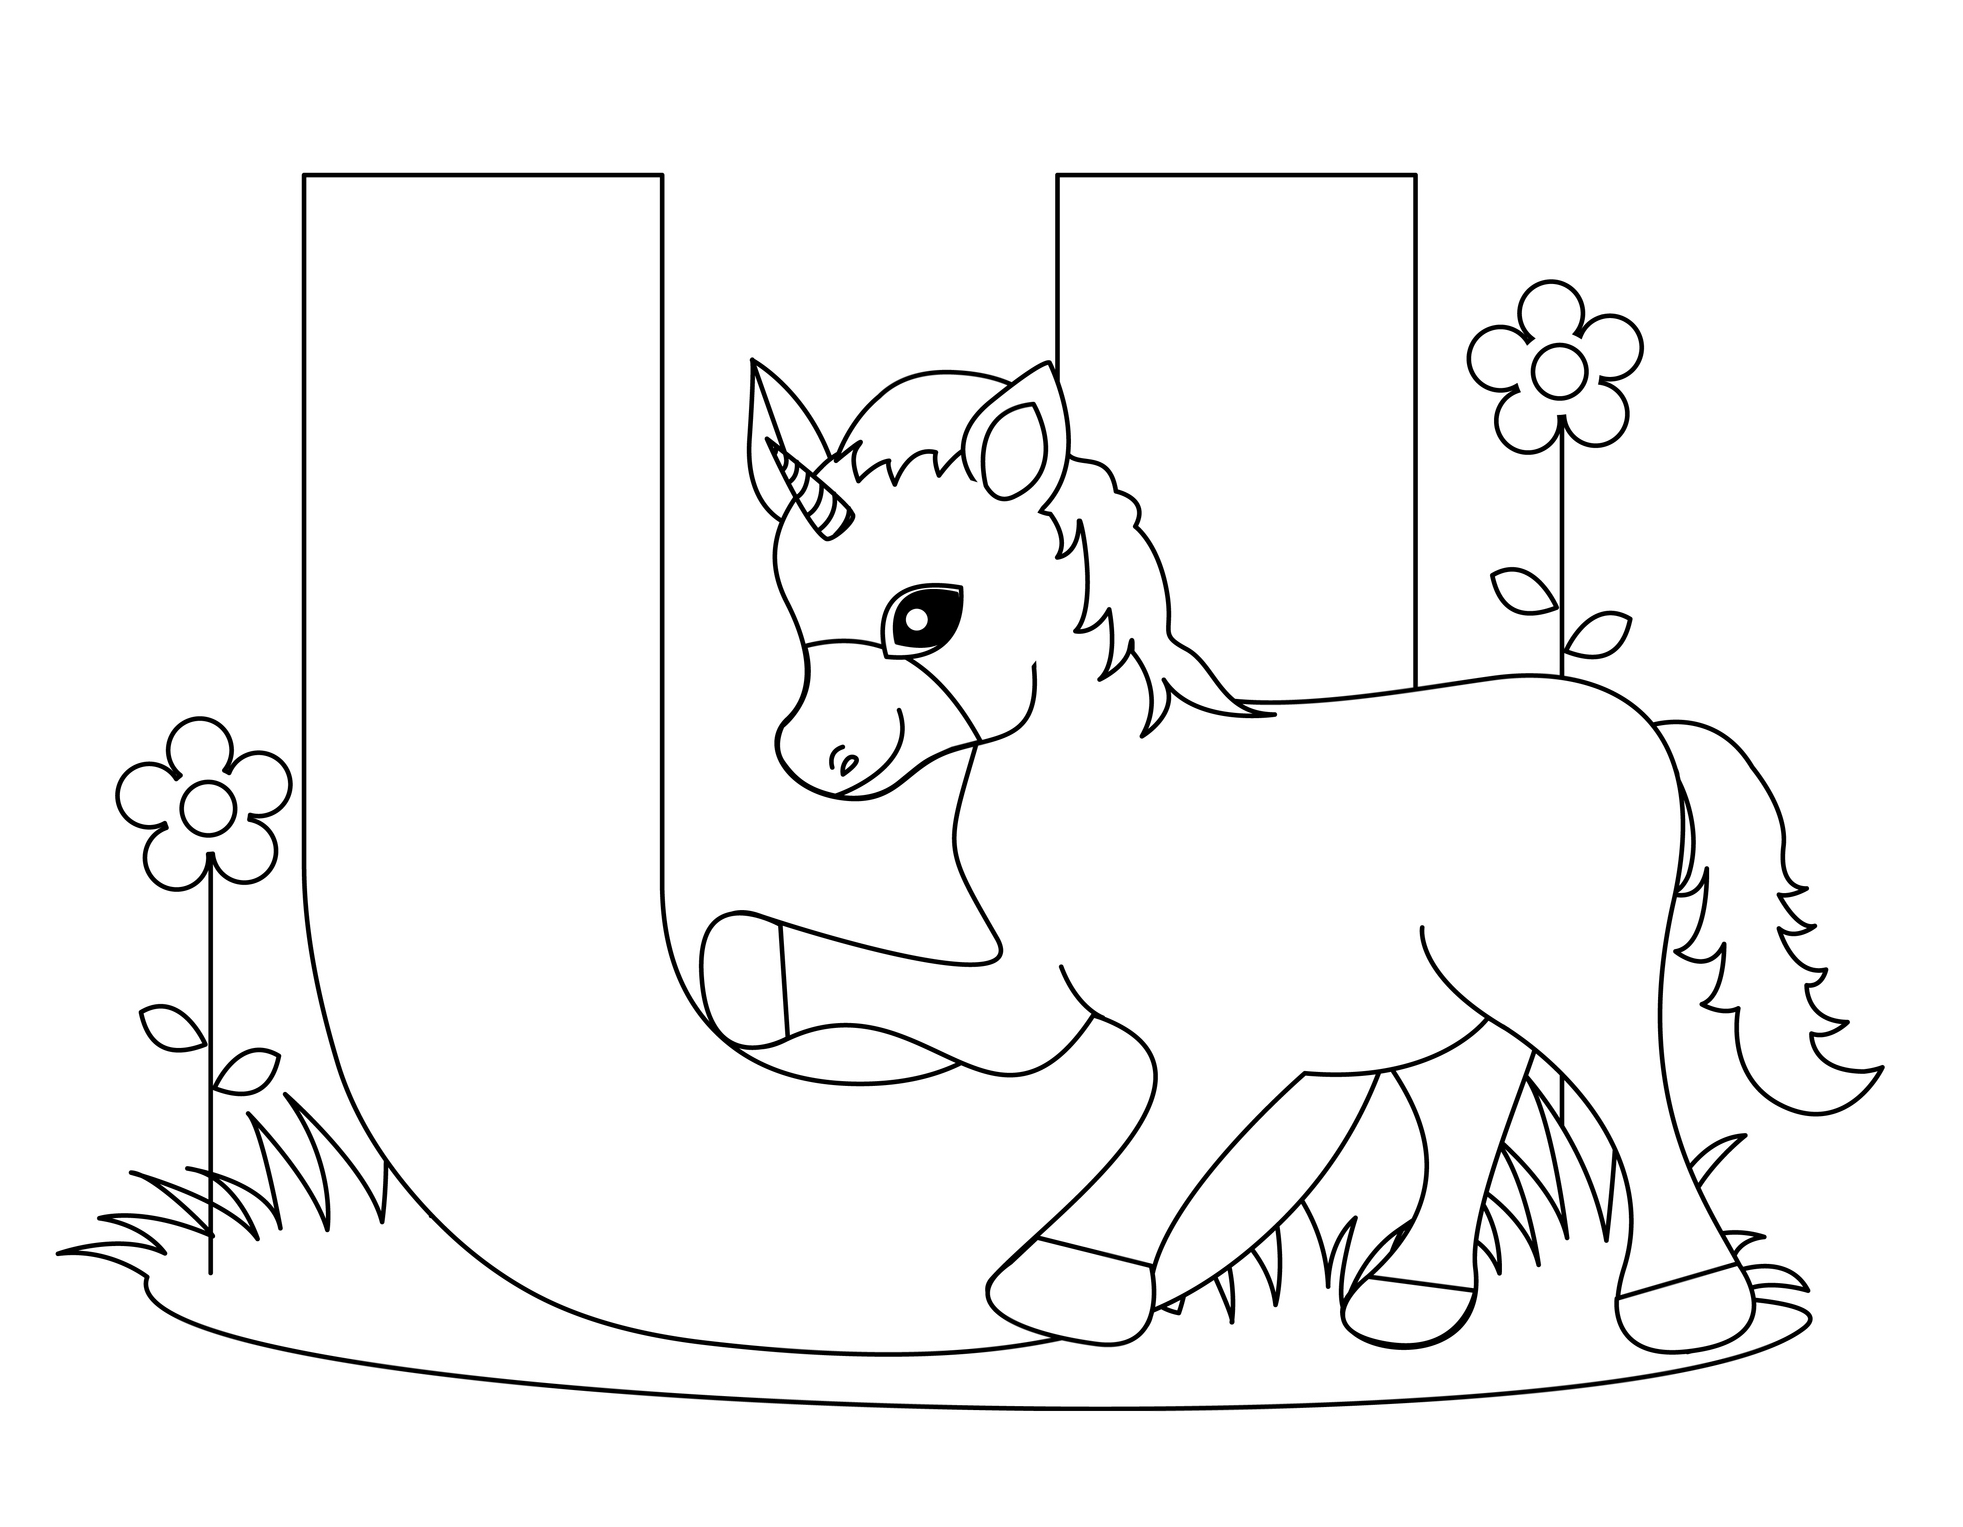 Animal Alphabet Coloring Pages at GetColorings.com   Free ...